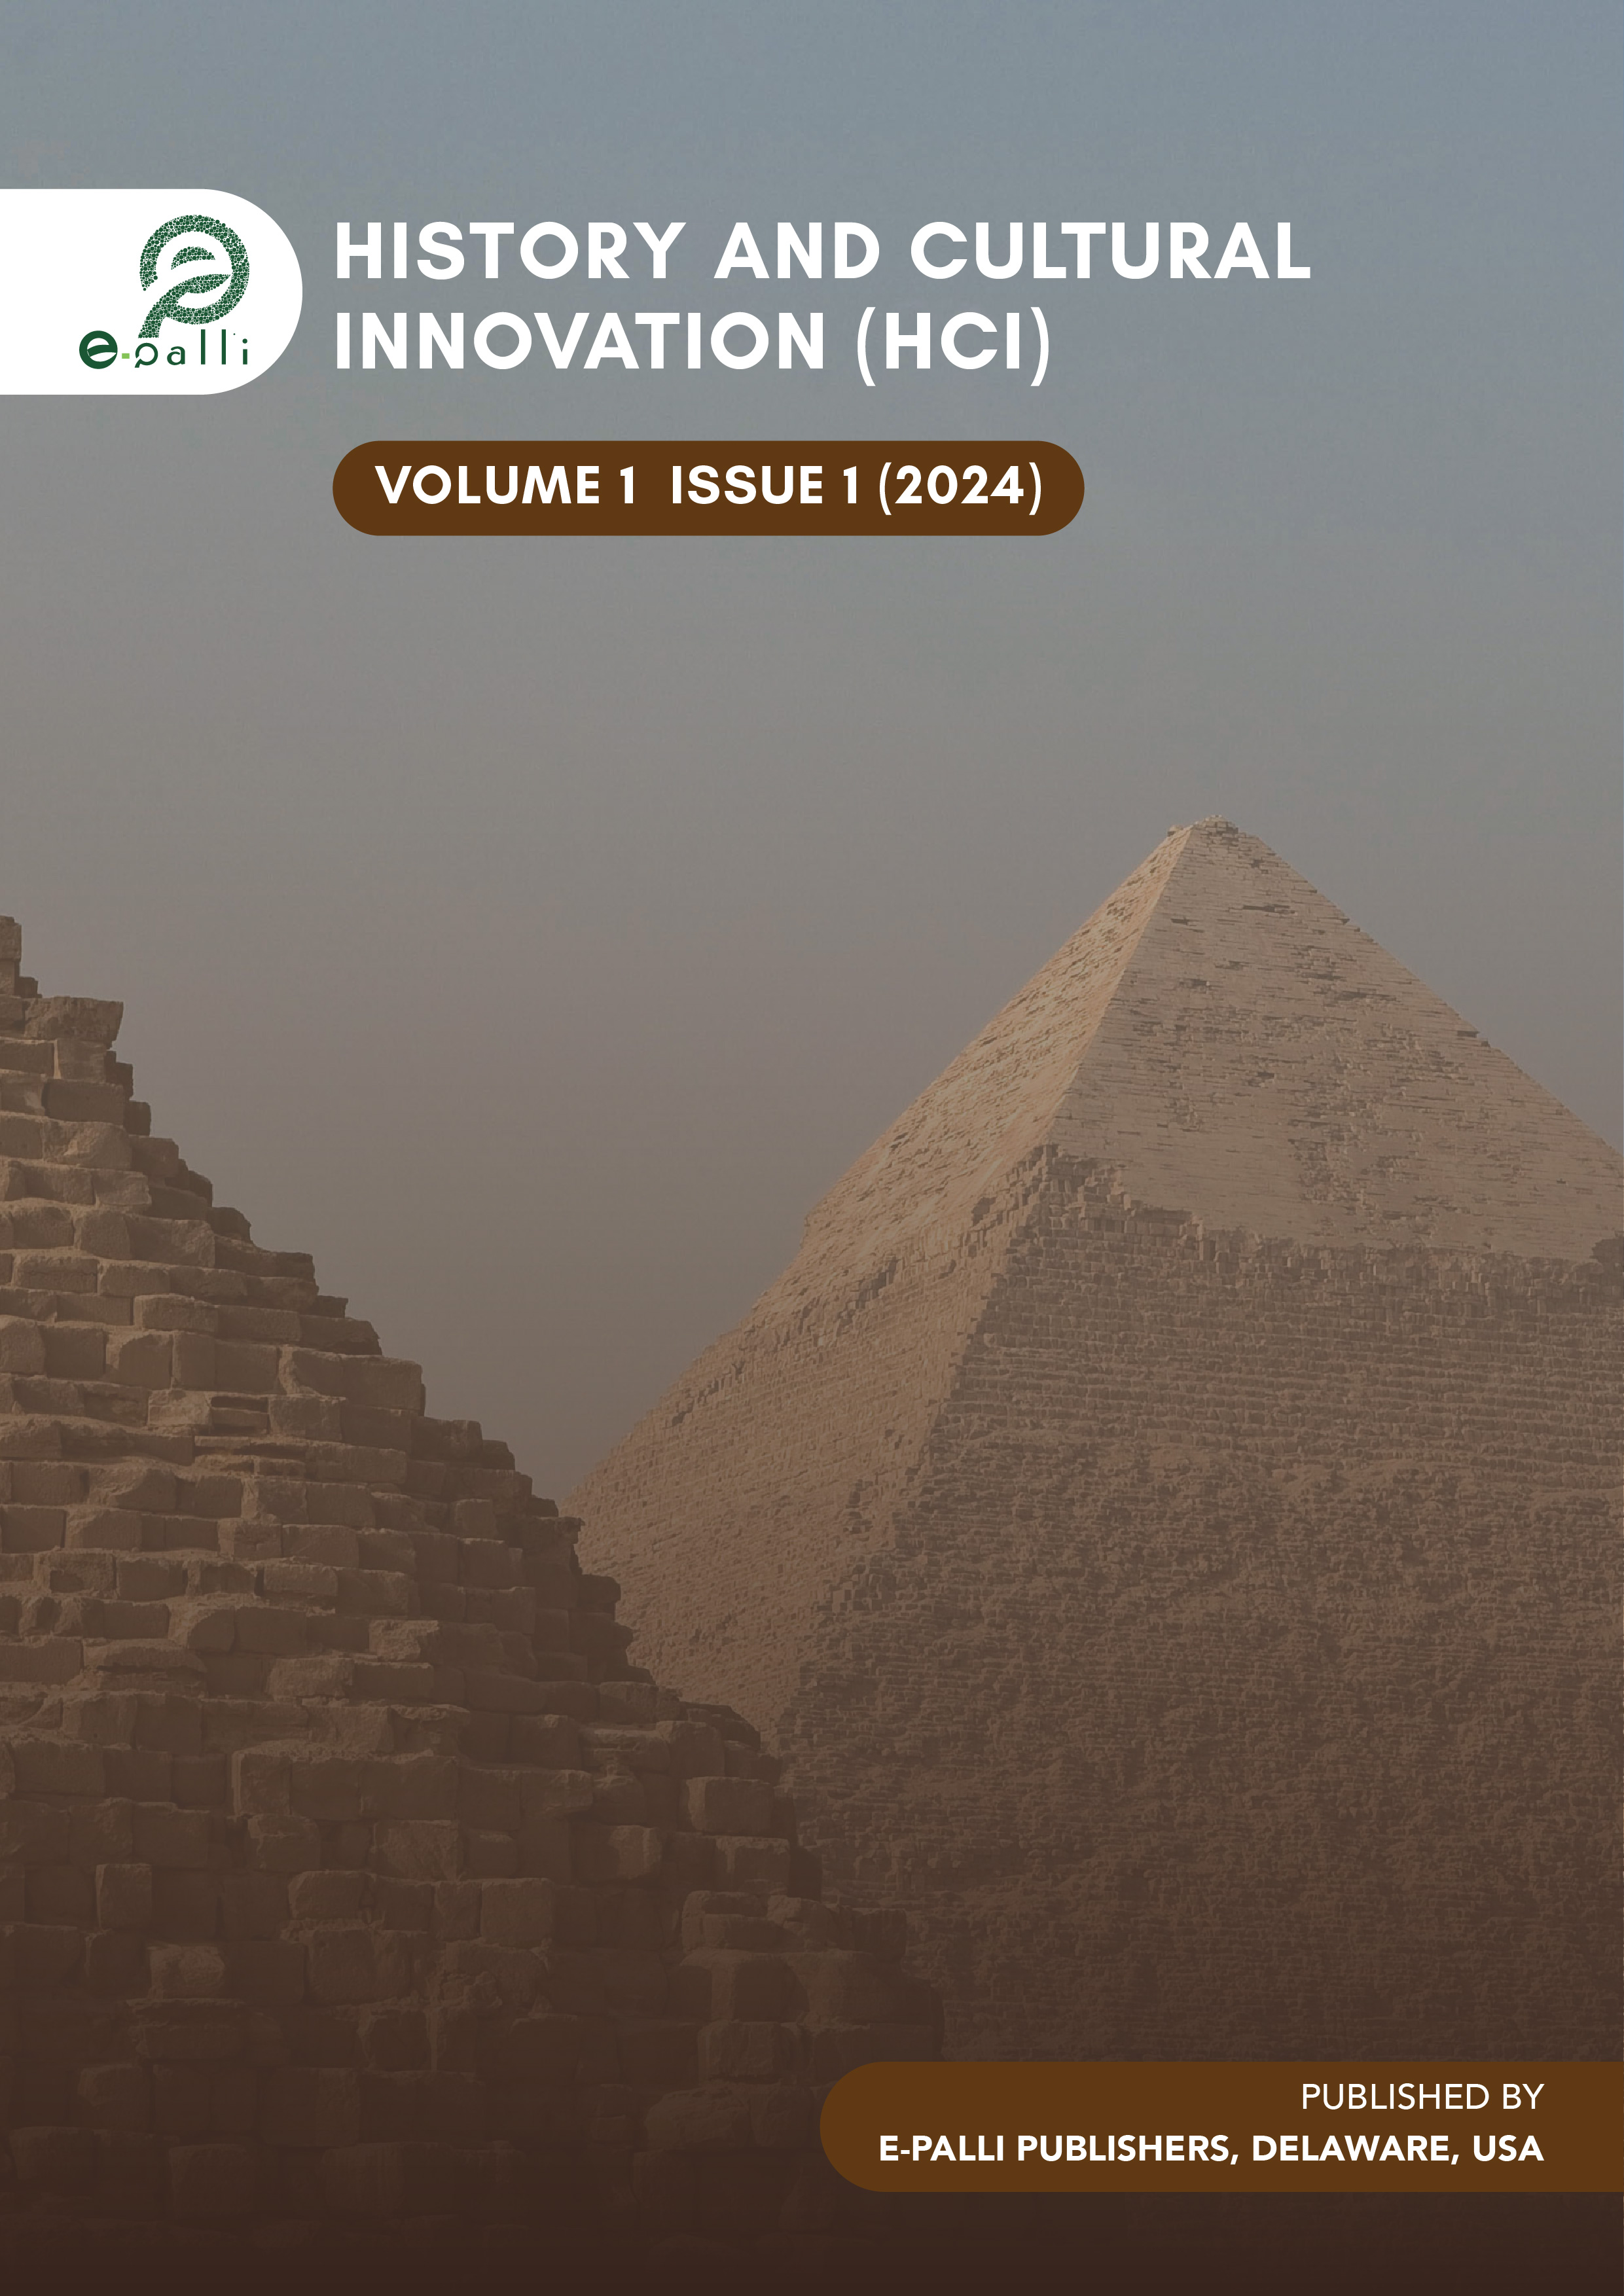                     View Vol. 1 No. 1 (2024): History and Cultural Innovation
                